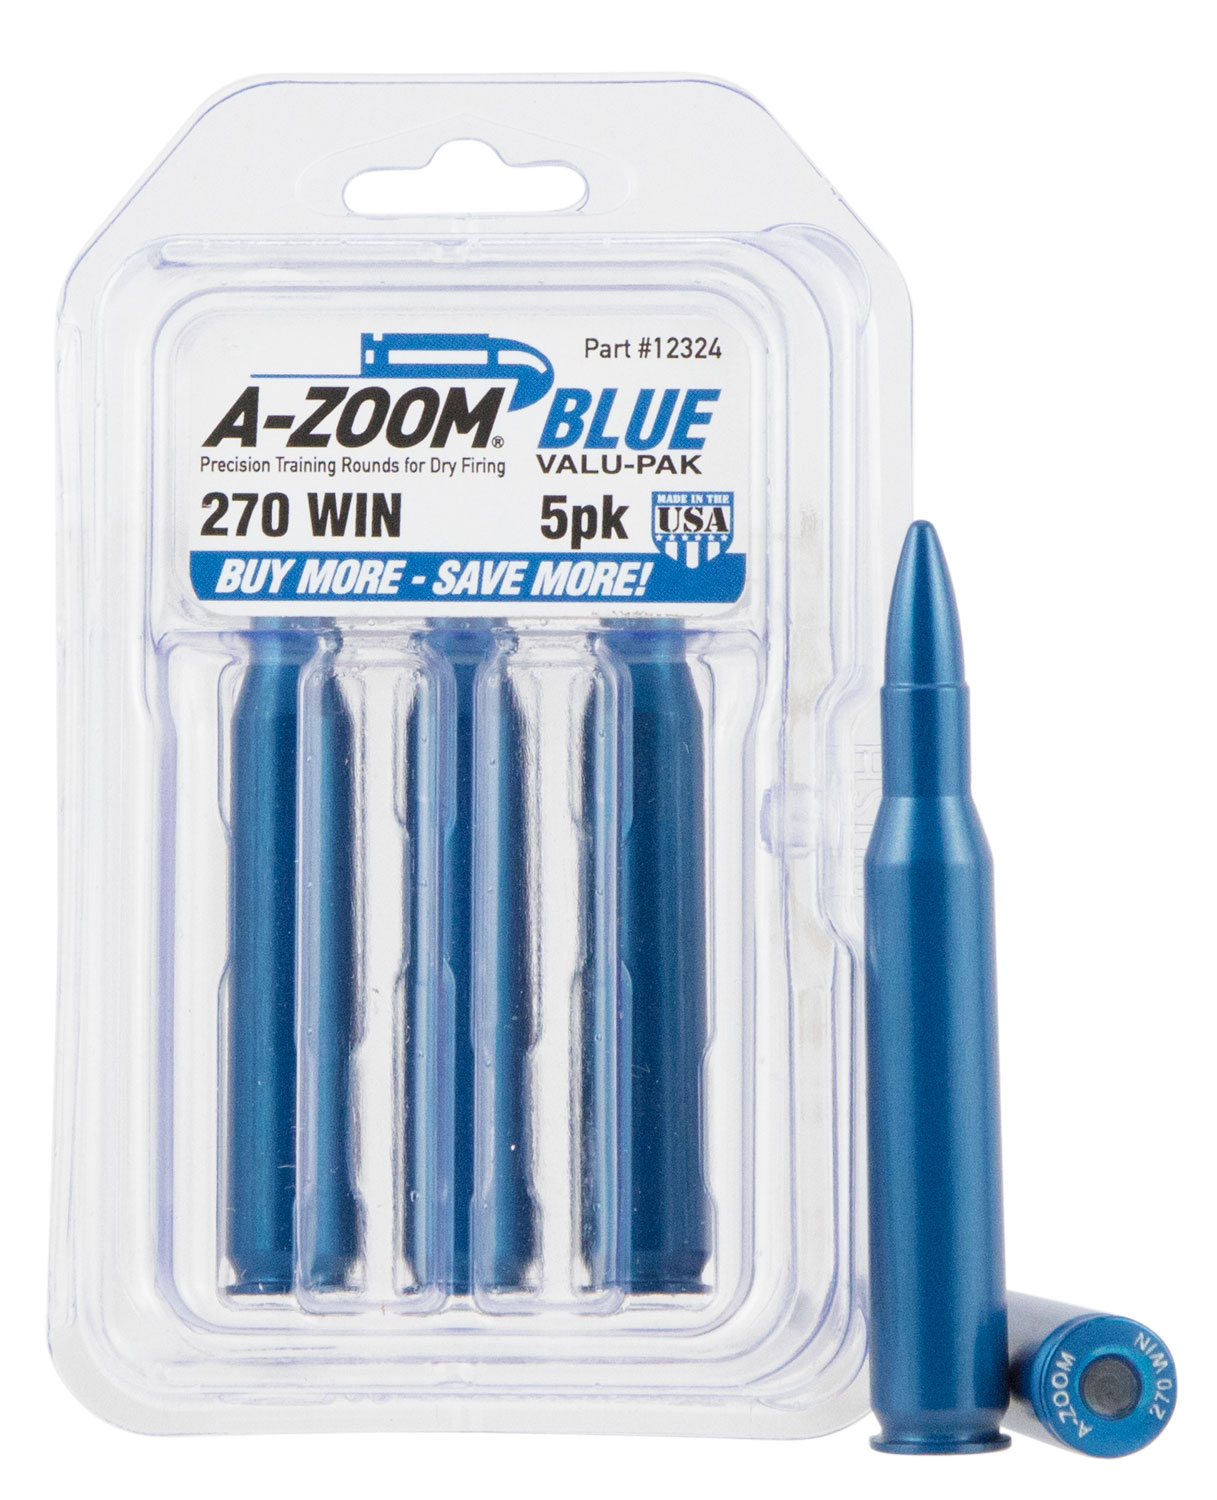 A-Zoom 12324 Value Pack Rifle 270 Win 5 Pkg.